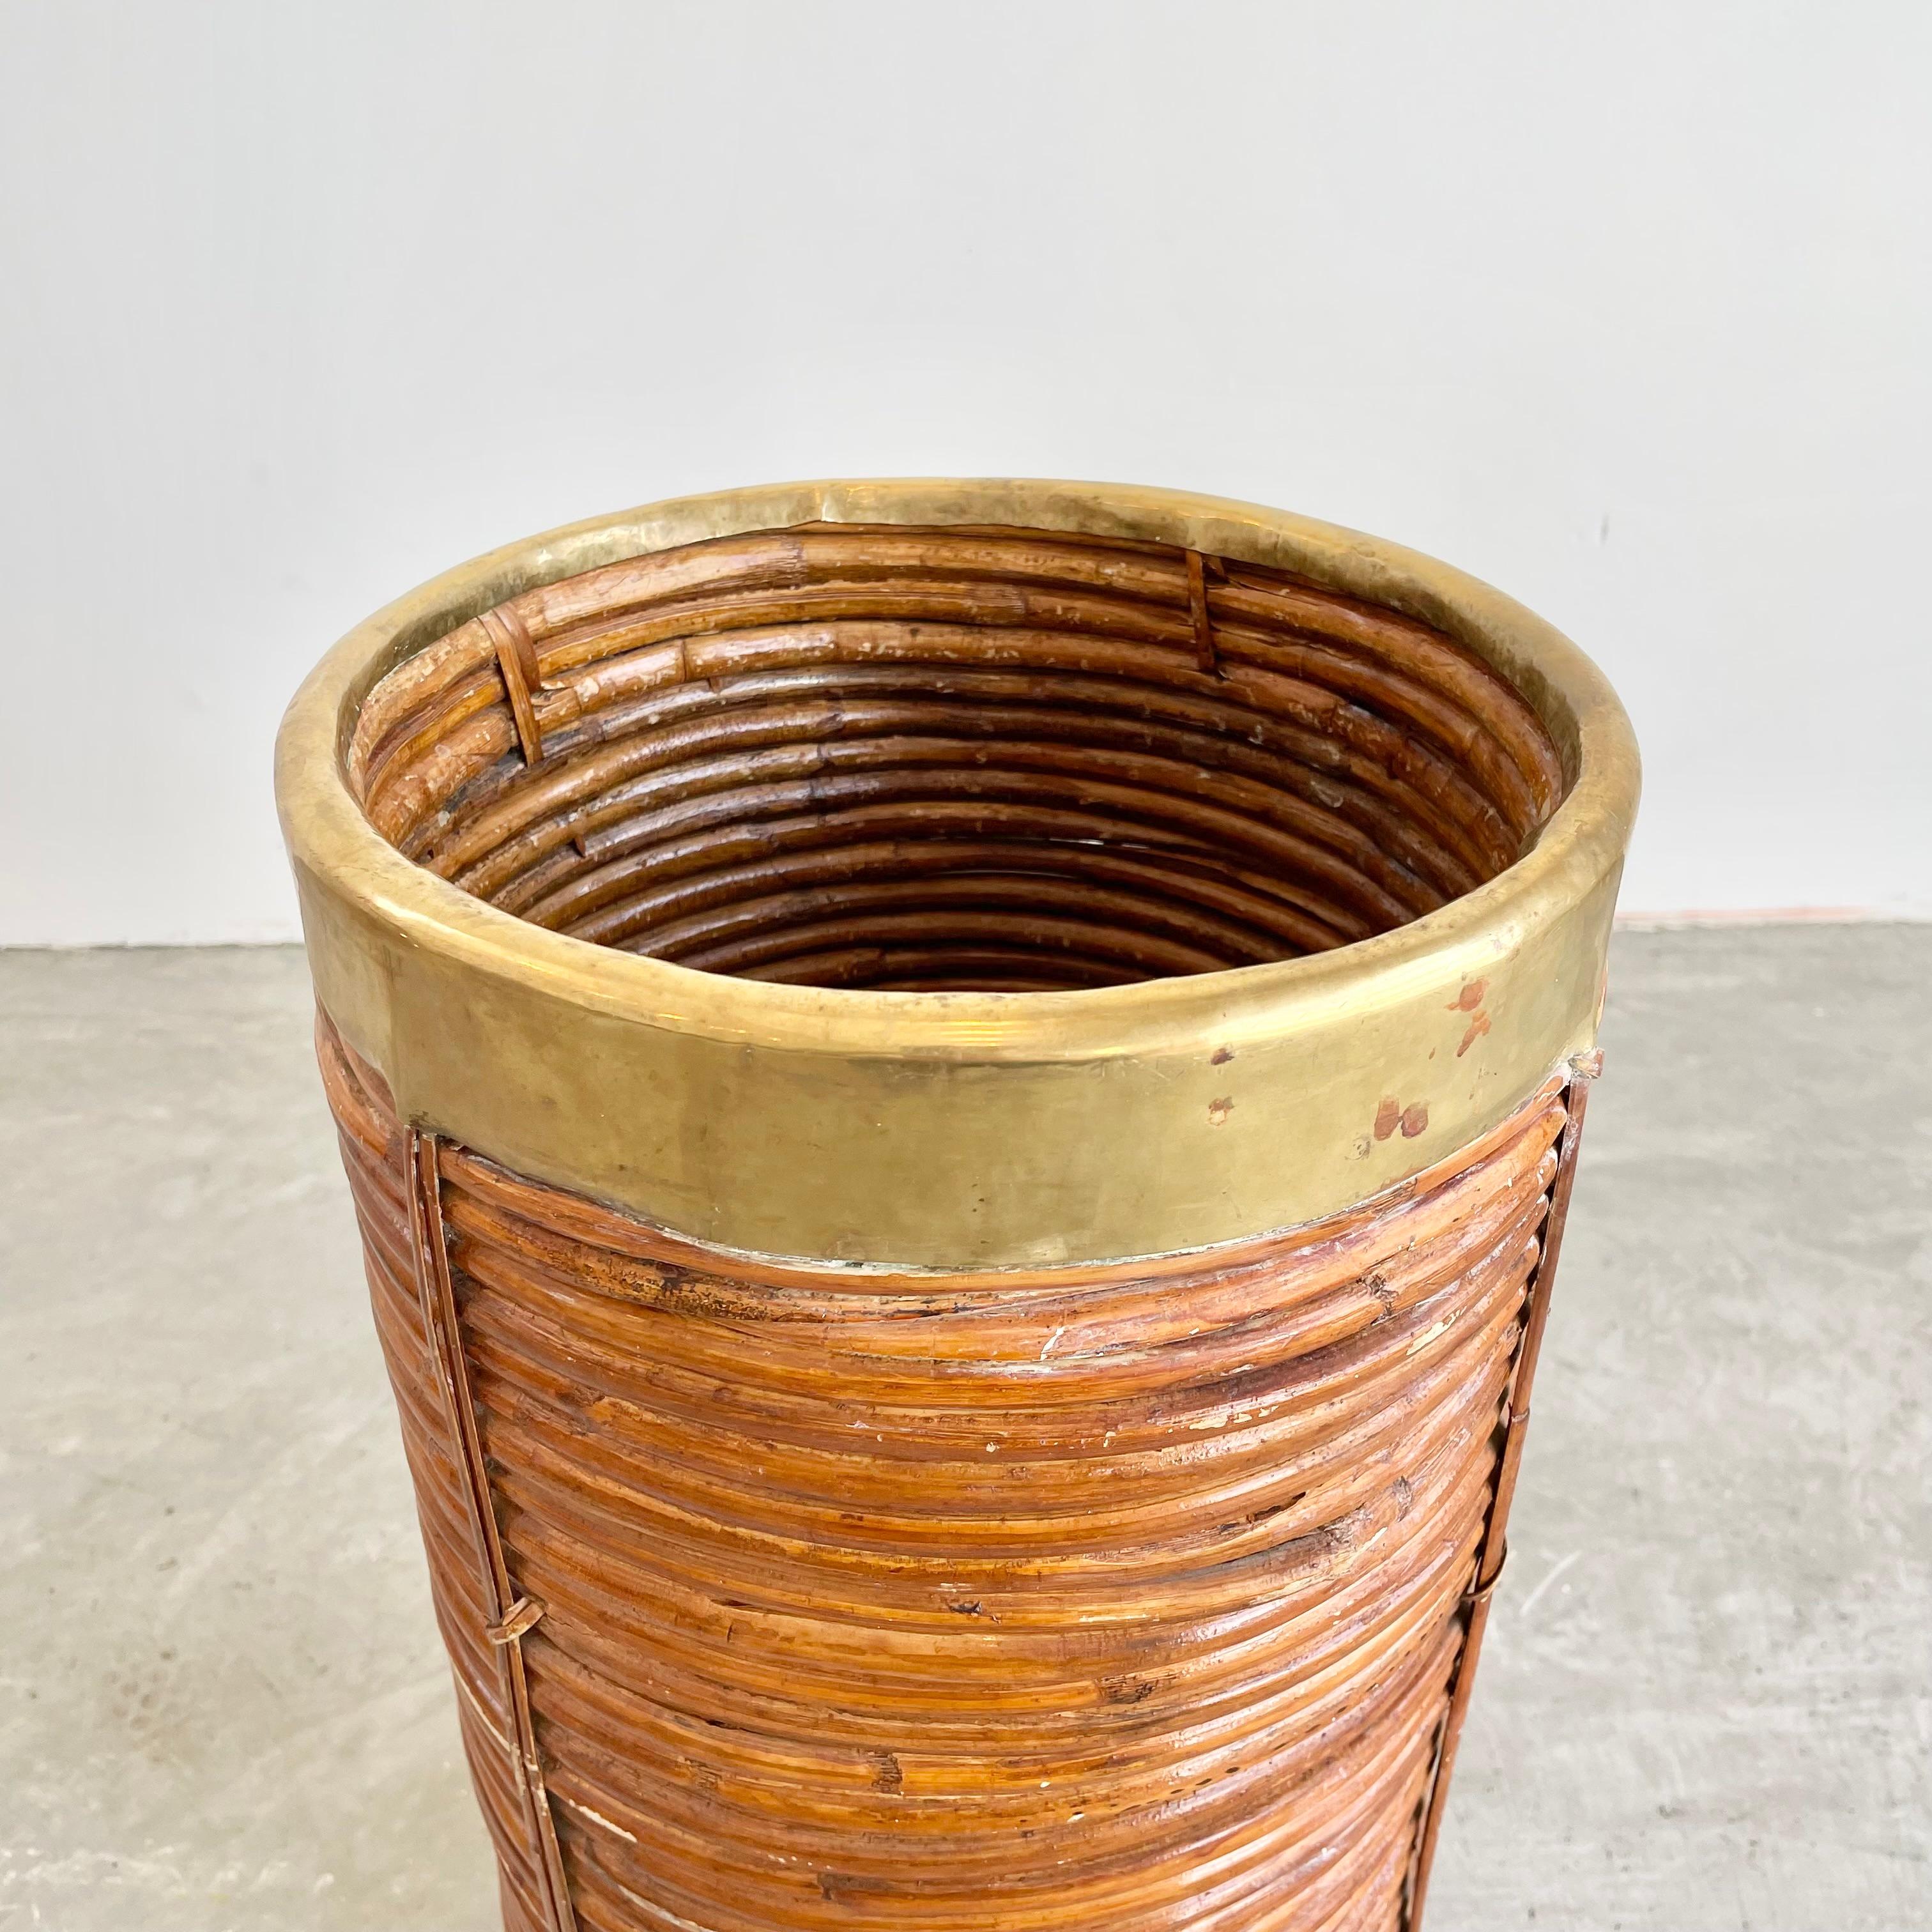 Gorgeous rattan and brass umbrella holder in the style of Gabriella Crespi. Rattan pieces are wrapped tightly in a circle with a thick brass lip around the top. Rattan is woven together with wicker ties as well as glued together. Great sculptural